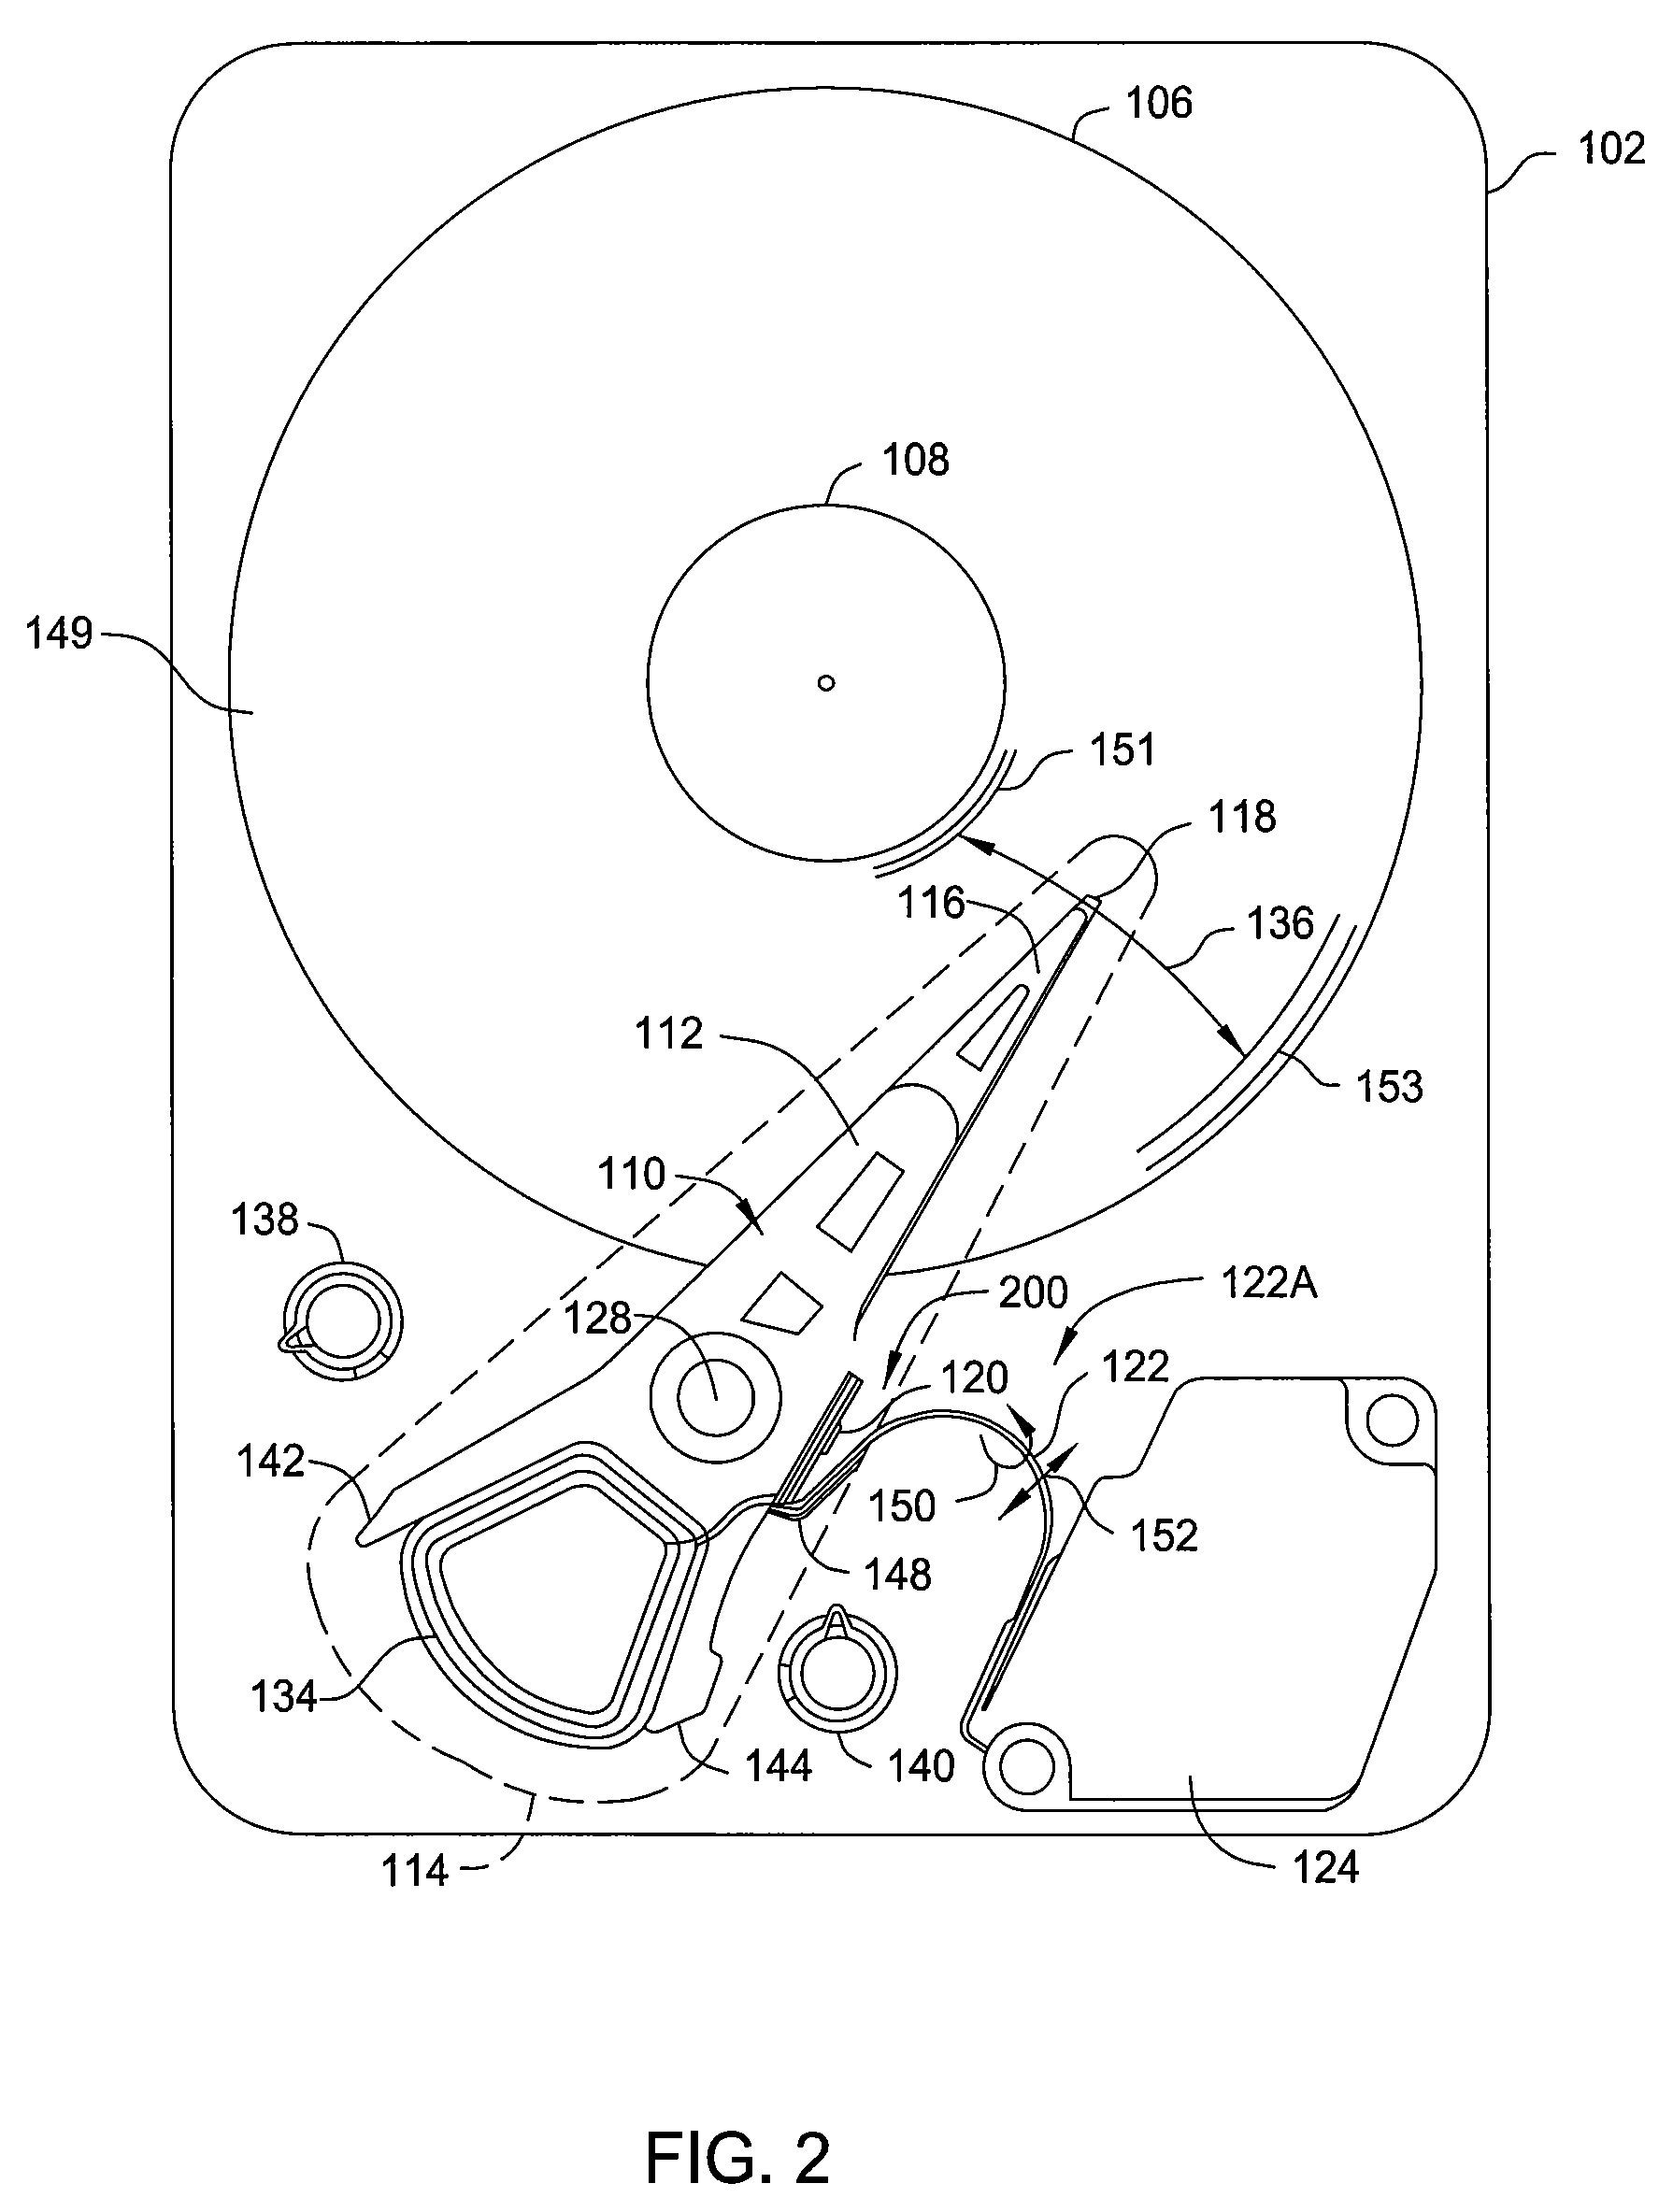 Disk Drive Assembly Having Flexible Support for Flexible Printed Circuit Board